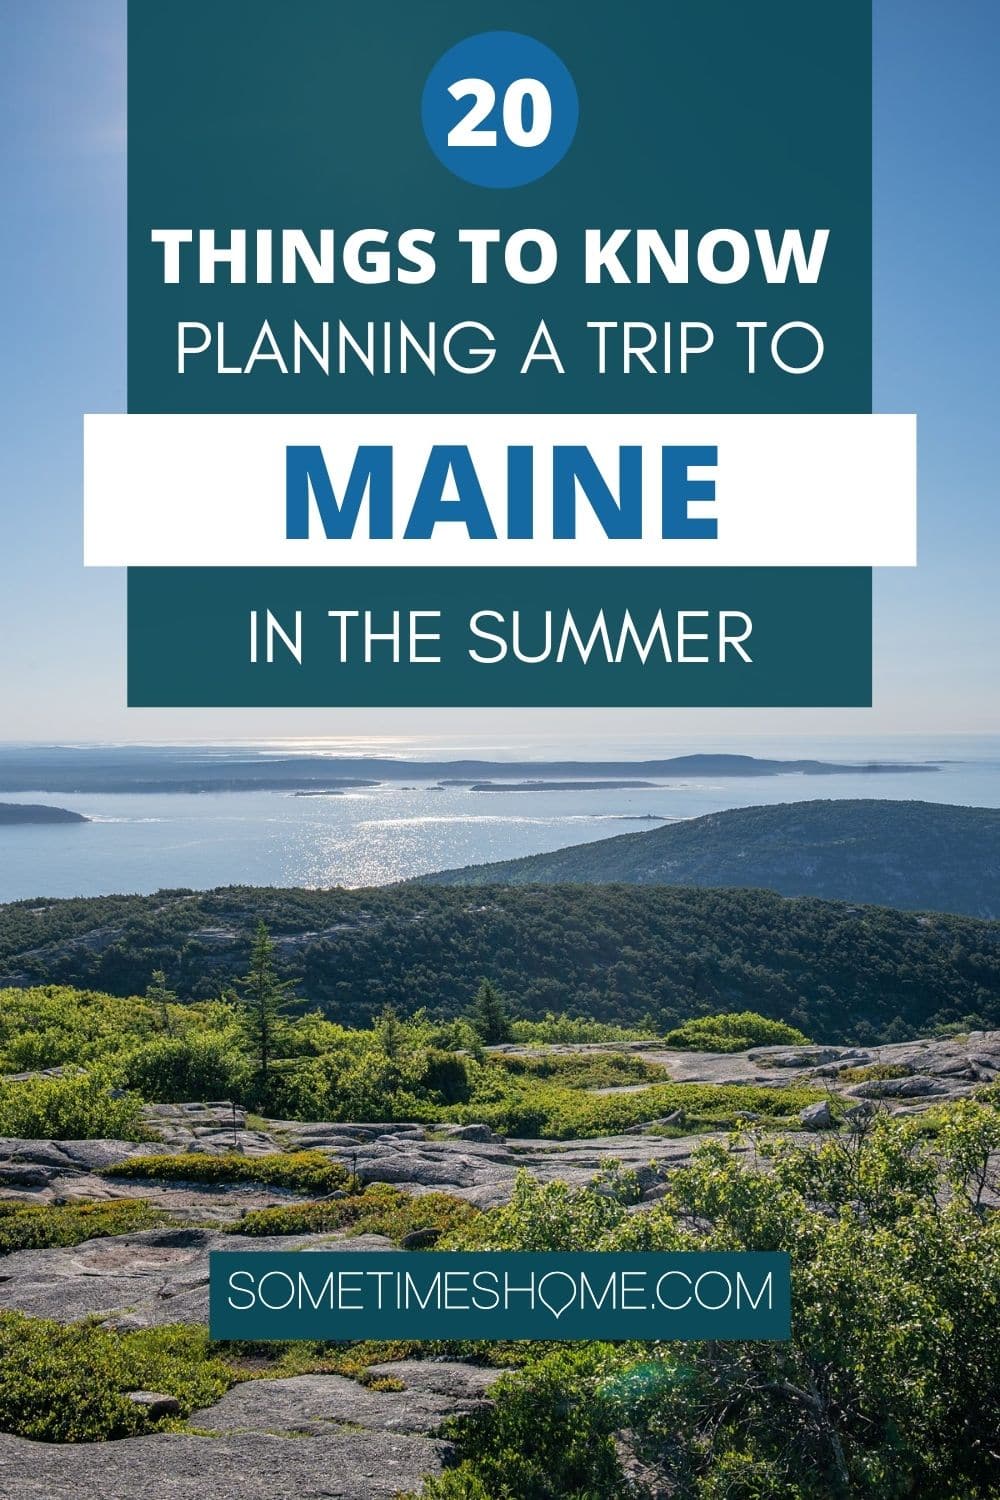 20 Things to Know if you're planning a trip to Maine in the summer, with a picture of the view from Cadillac Summit.